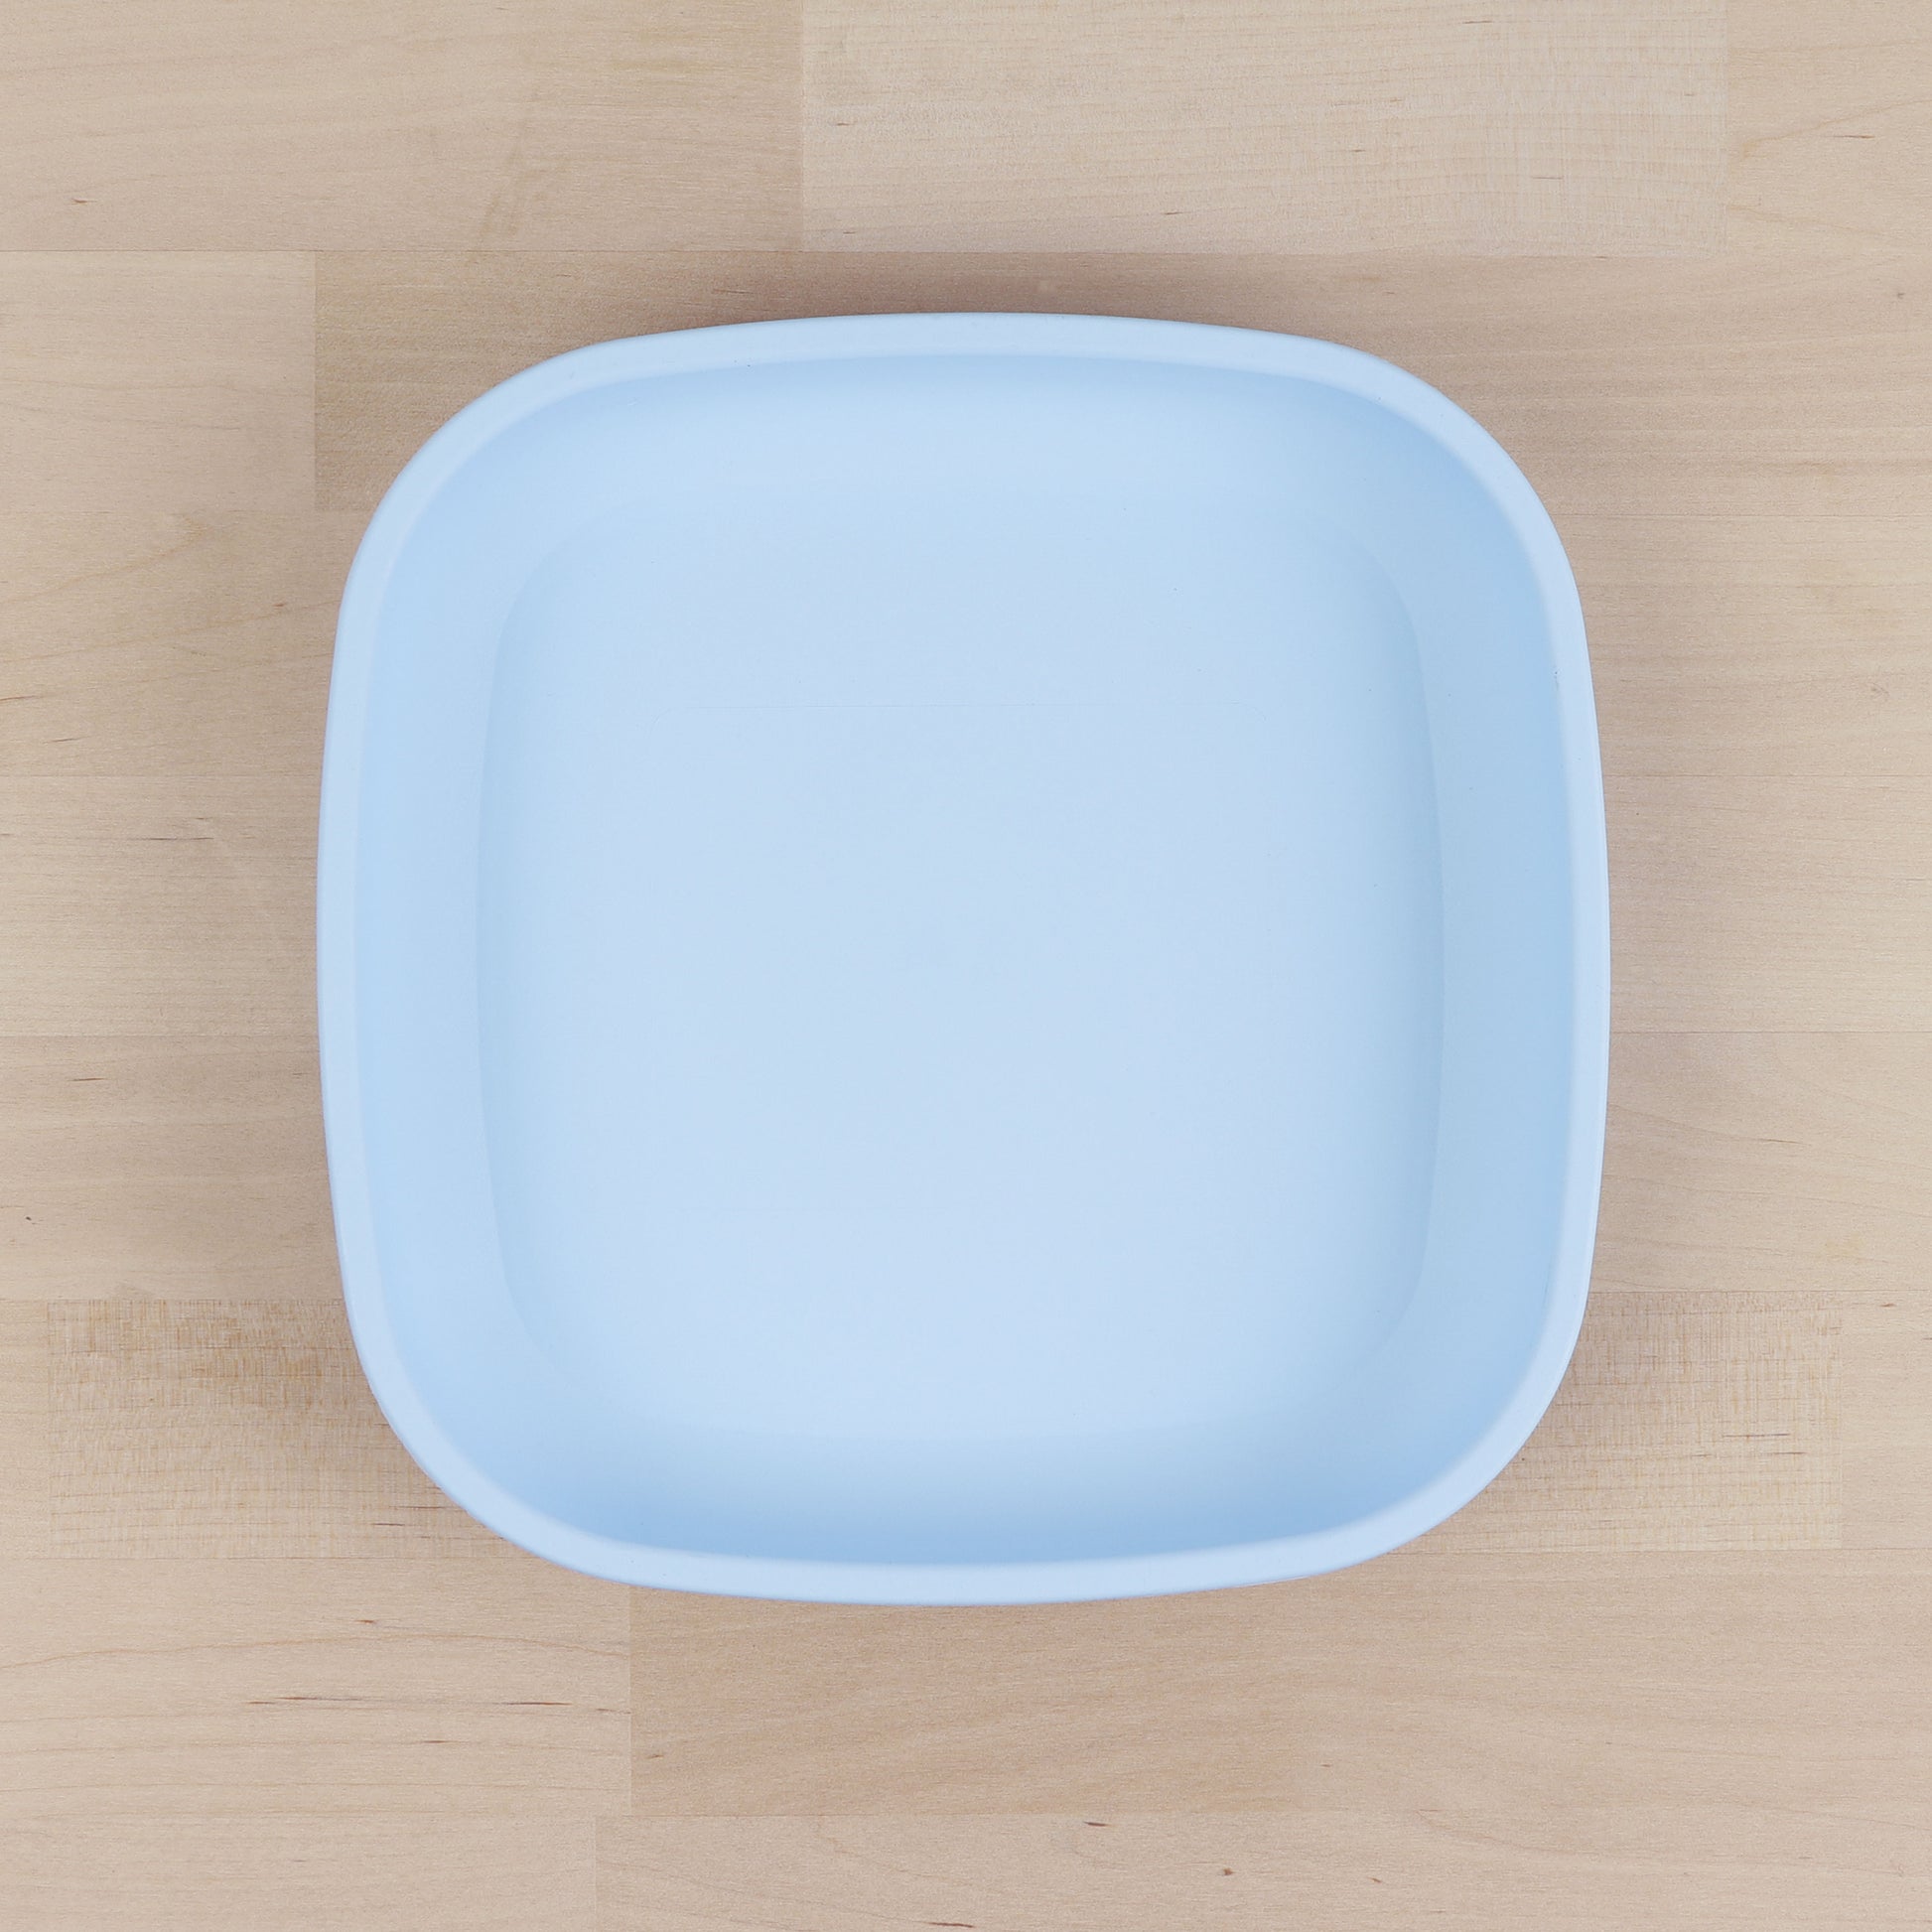 Re-Play Flat Plate Standard Size in Ice Blue from Bear & Moo